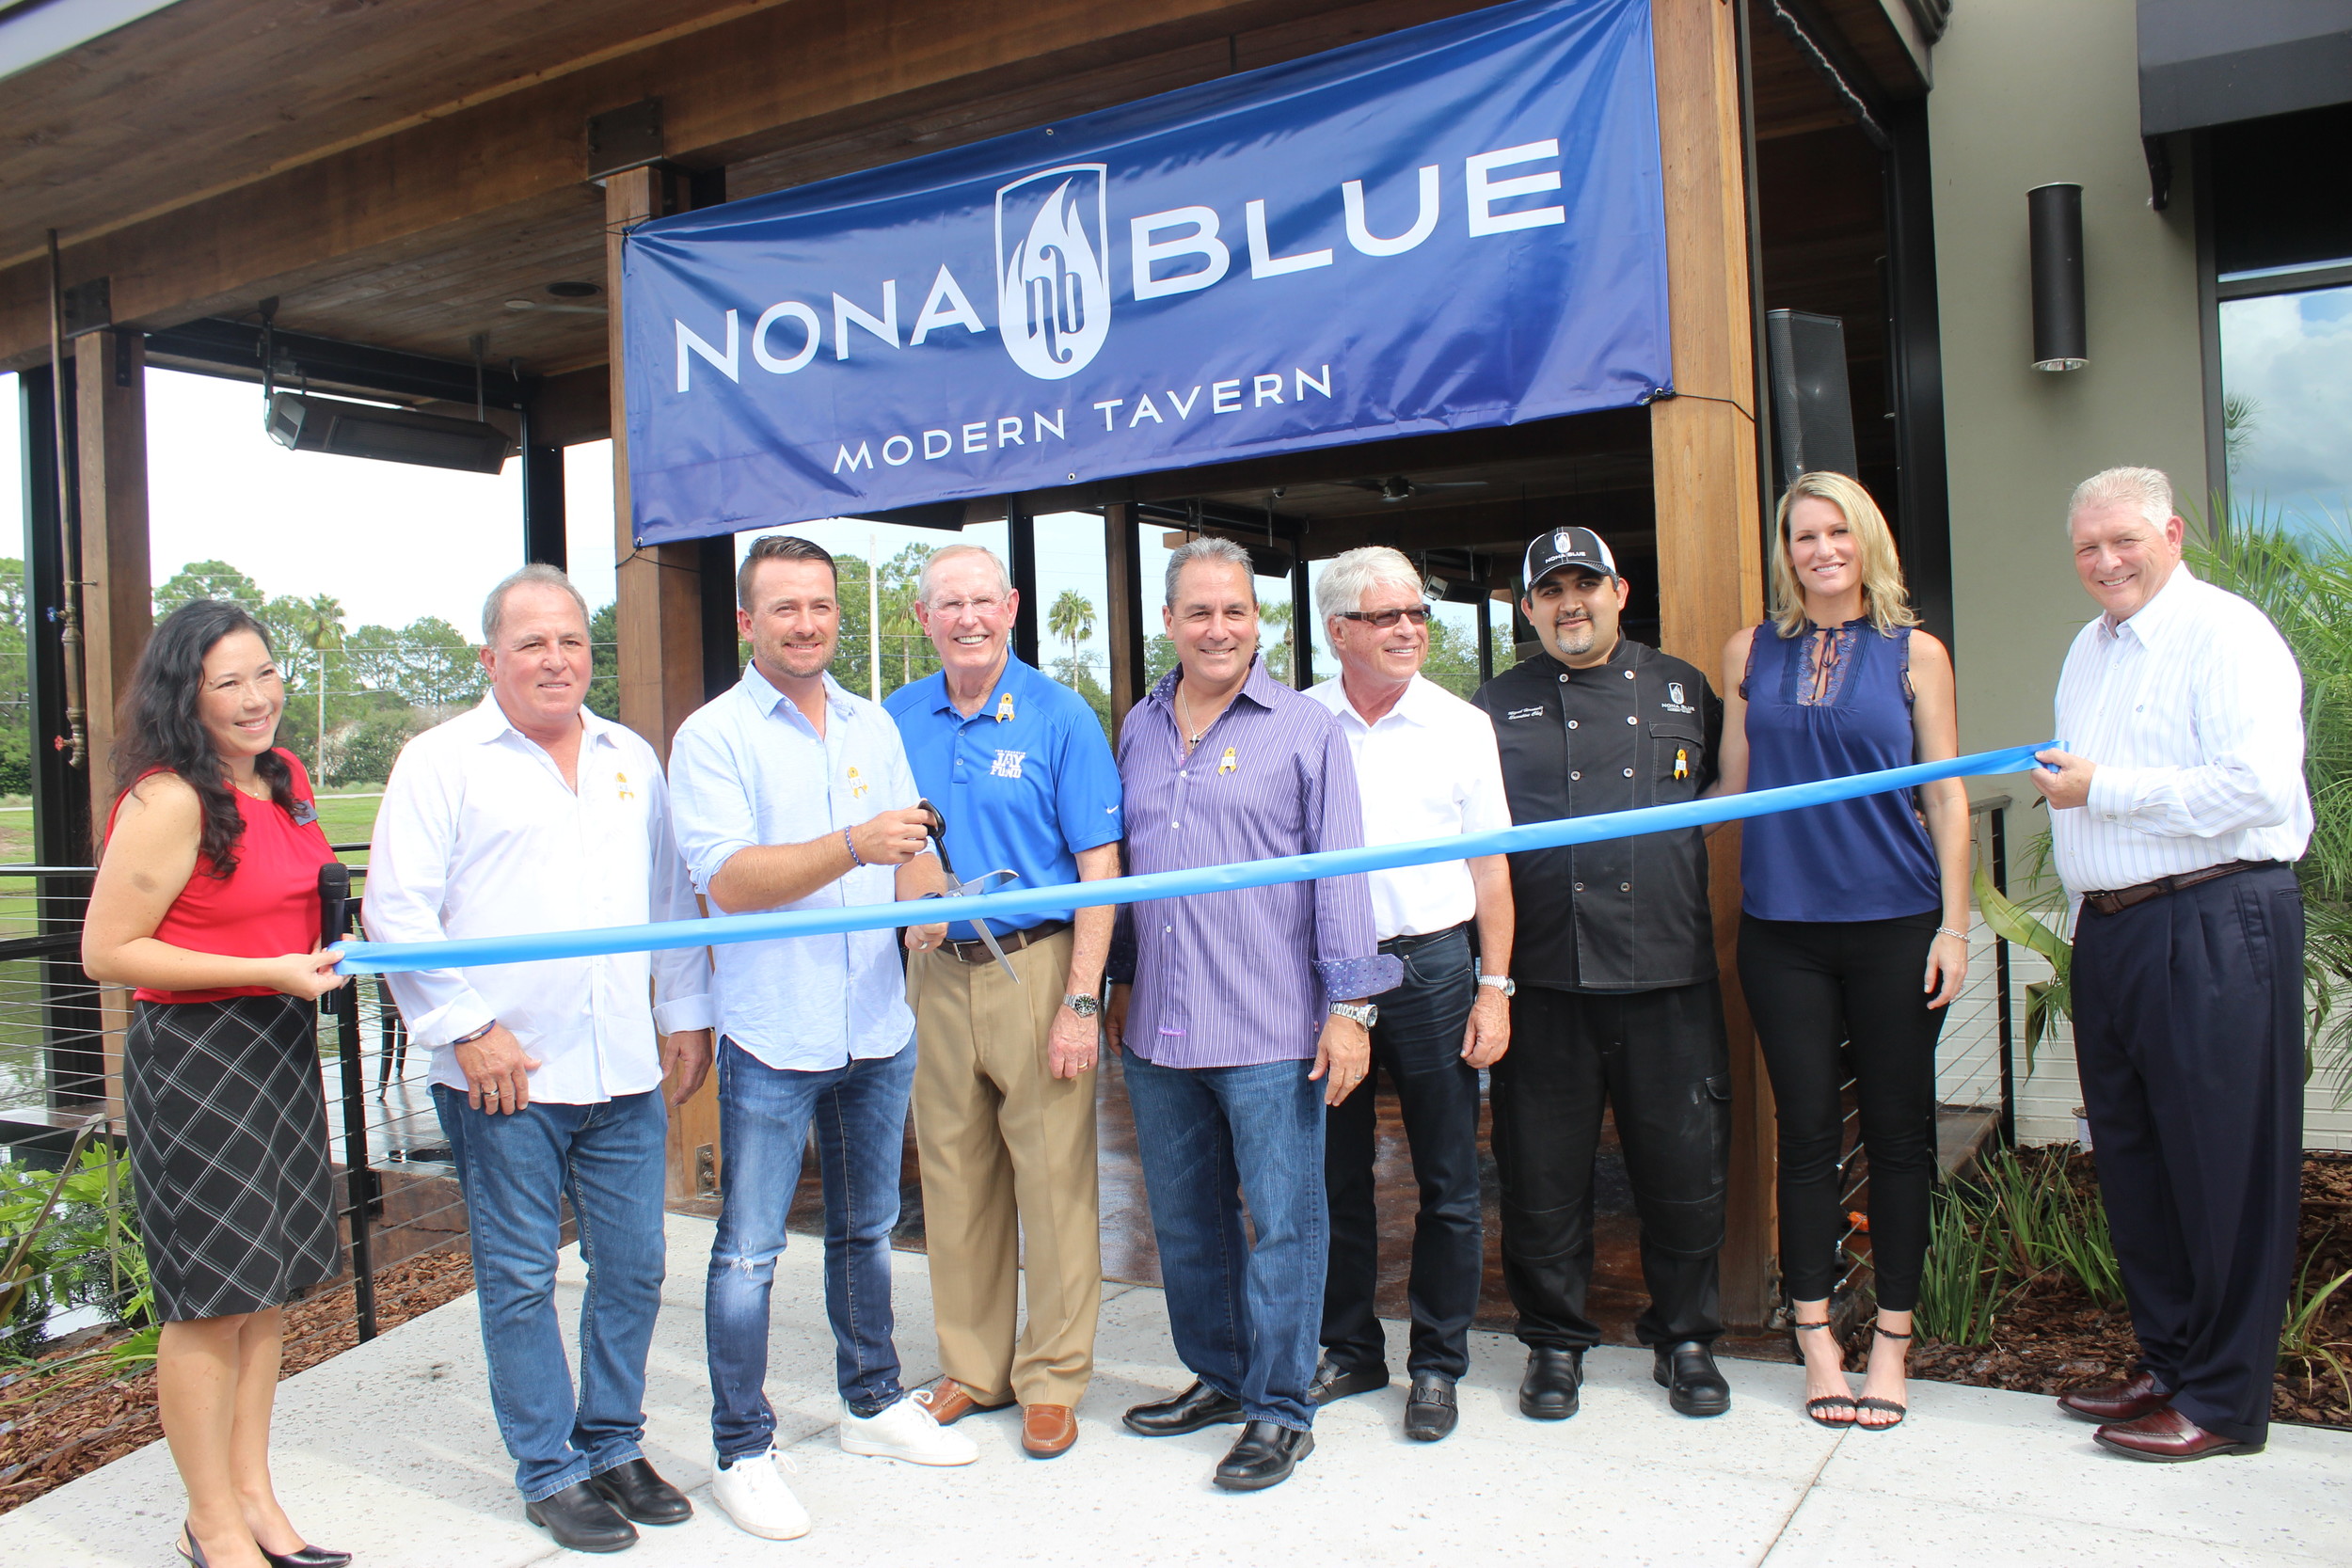 The Ponte Vedra Recorder was on hand Sept. 14 for the grand opening of new restaurant Nona Blue in Sawgrass Village. Handling ribbon cutting duties was PGA Tour golfer Graeme McDowell, who owns Nona Blue with partners Joe Davi and Bill Bona.